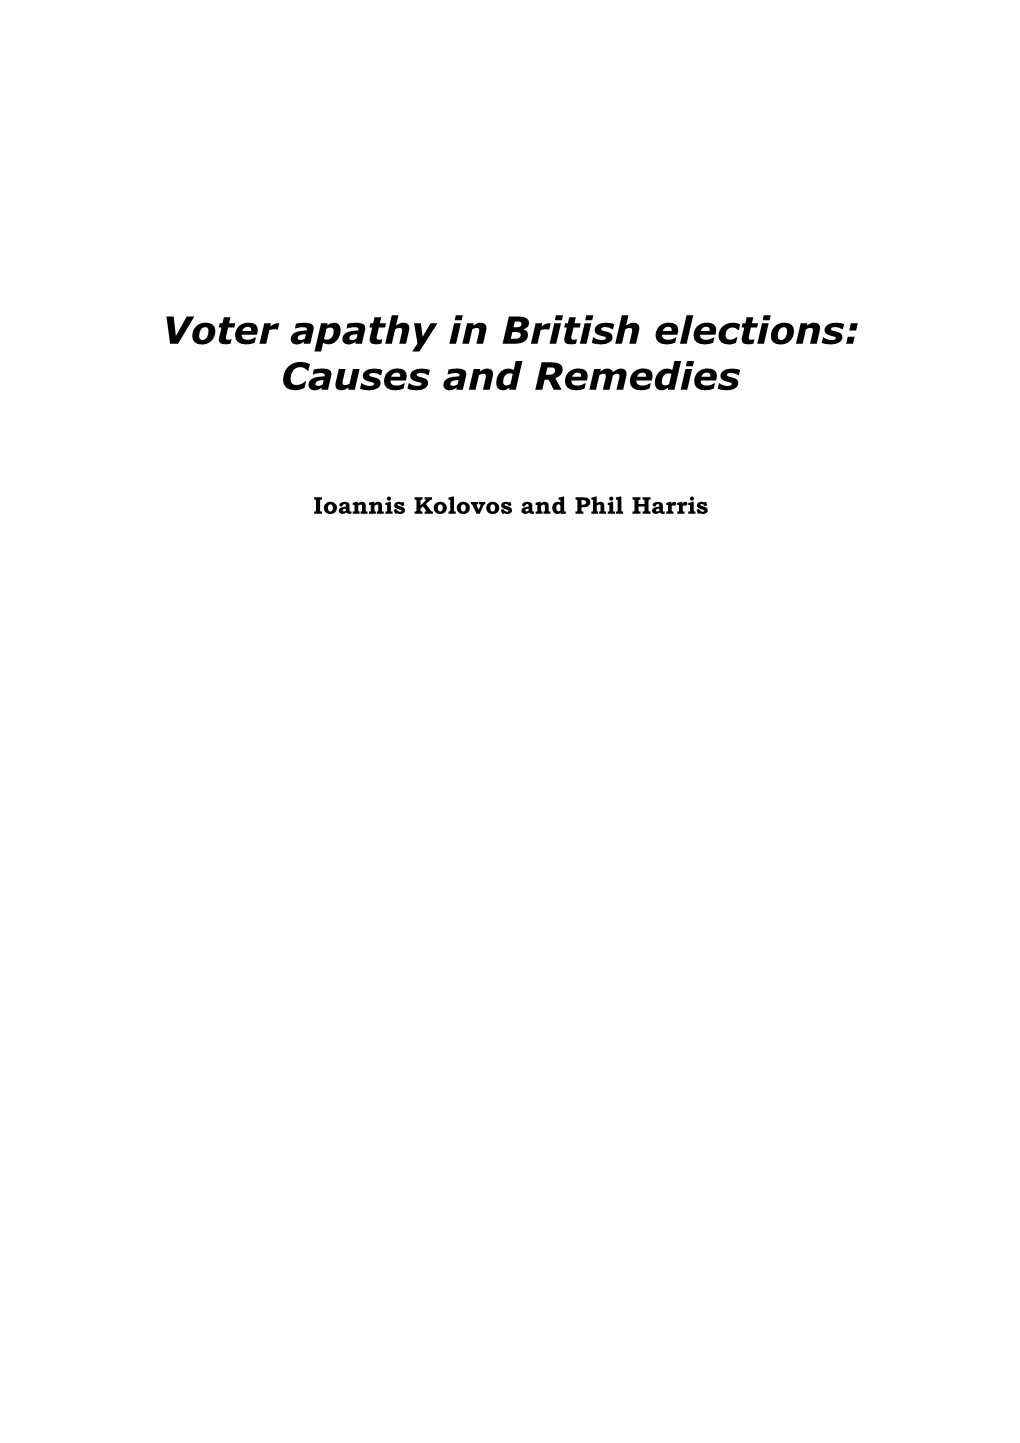 Voter Apathy in British Elections: Causes and Remedies